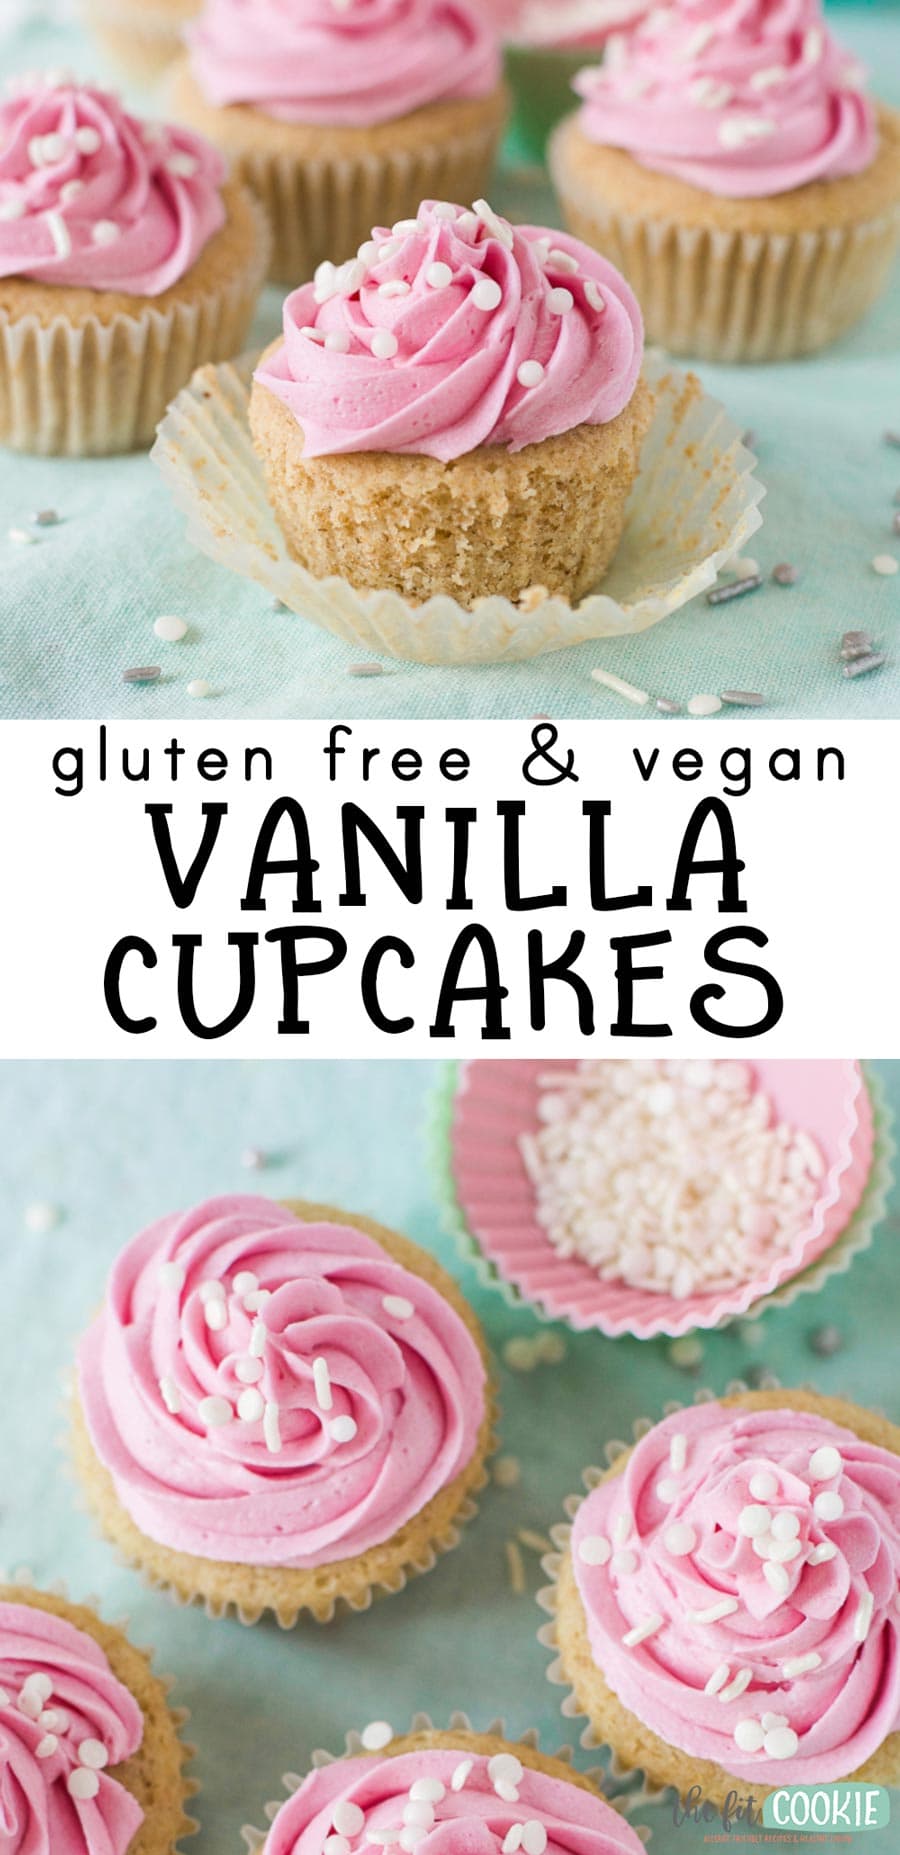 image collage of gluten free vegan vanilla cupcakes with pink frosting